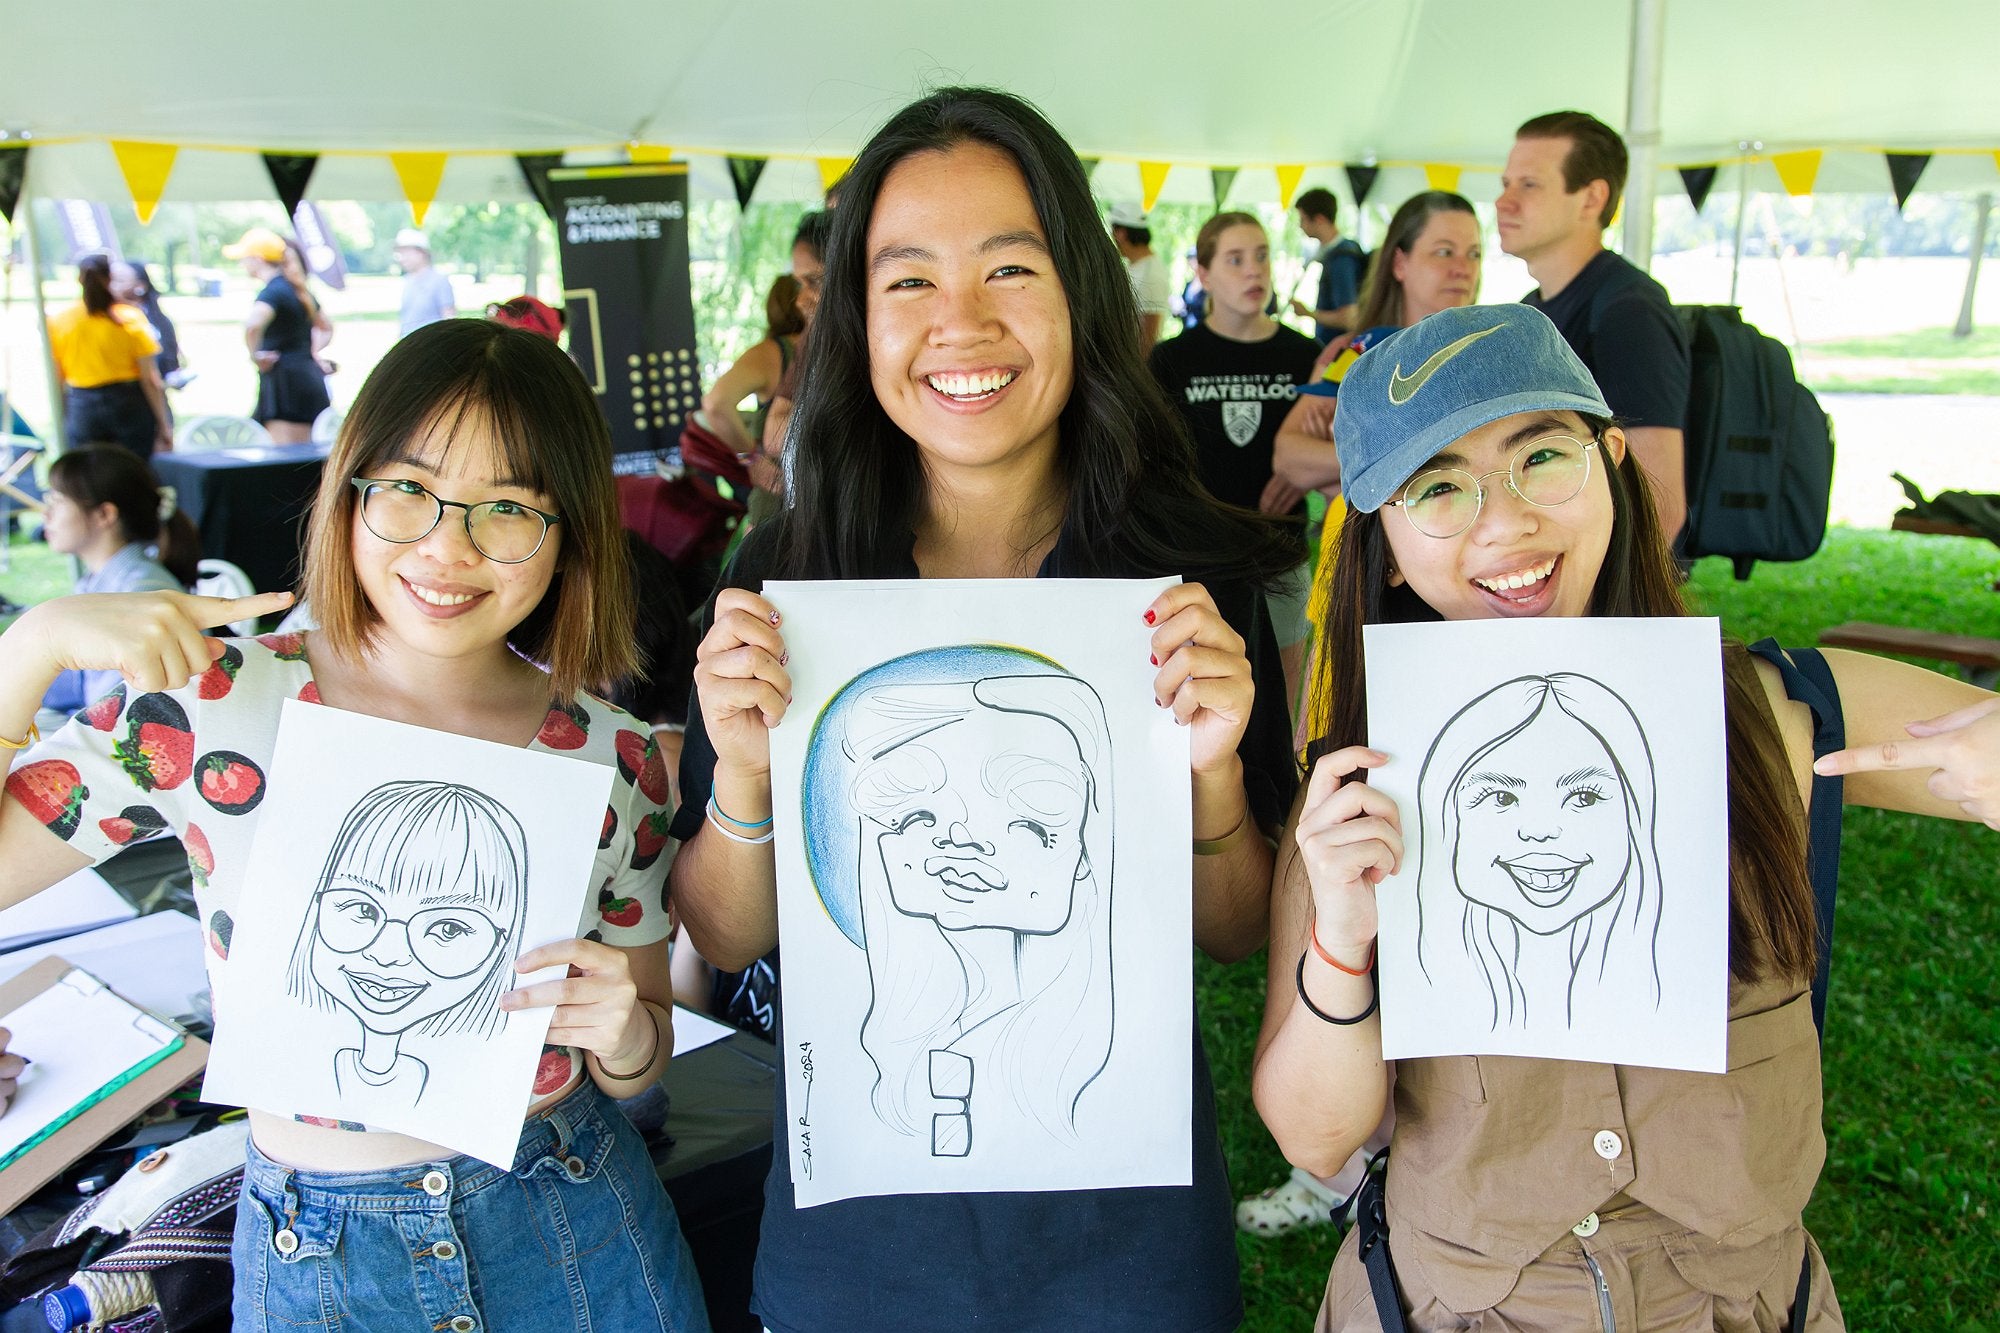 Three attendees each holding their caricature drawing and posing for the camera